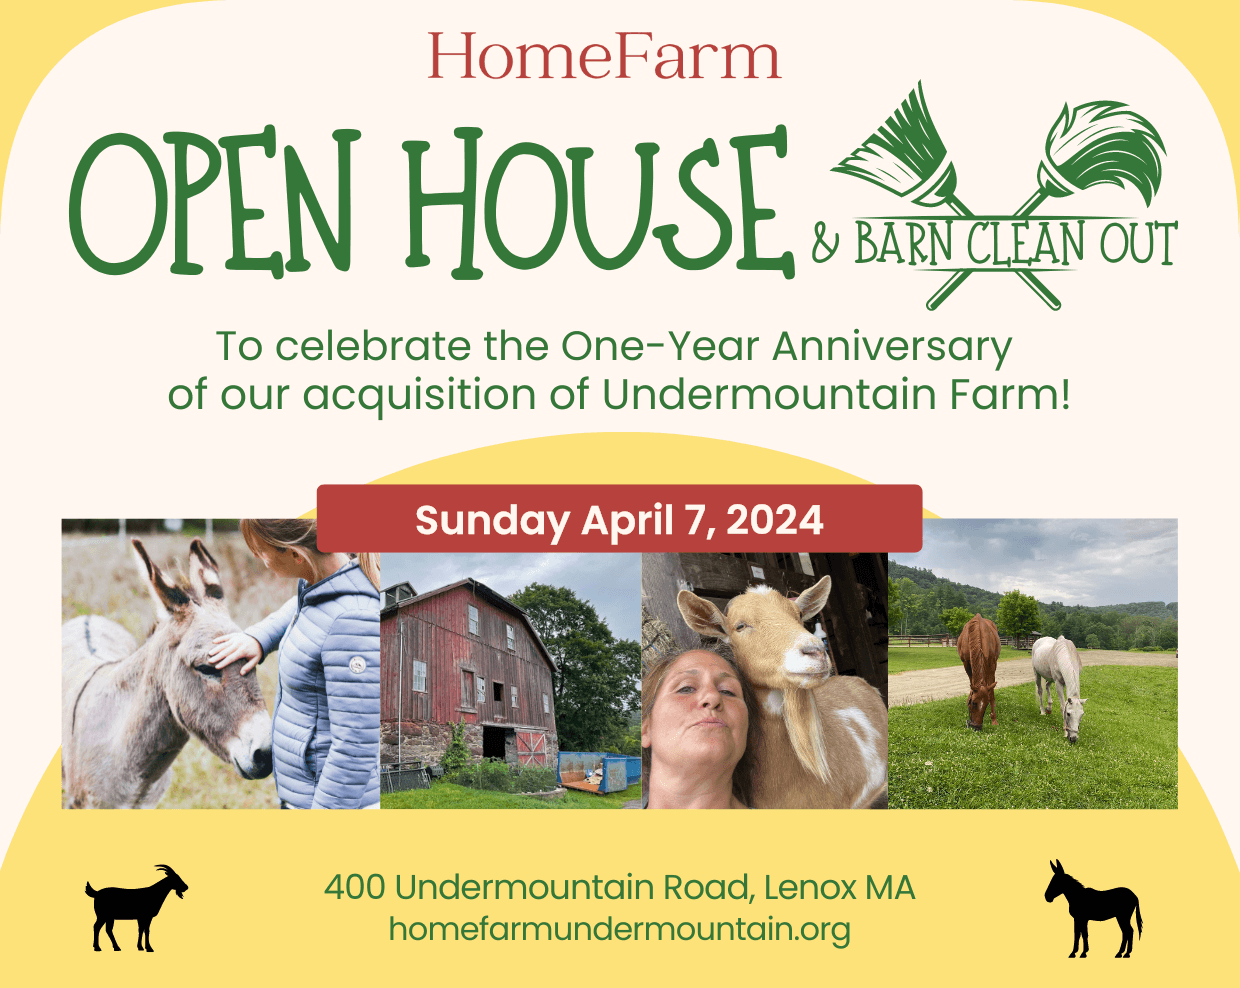 Check out the open house at HomeFarm Undermountain